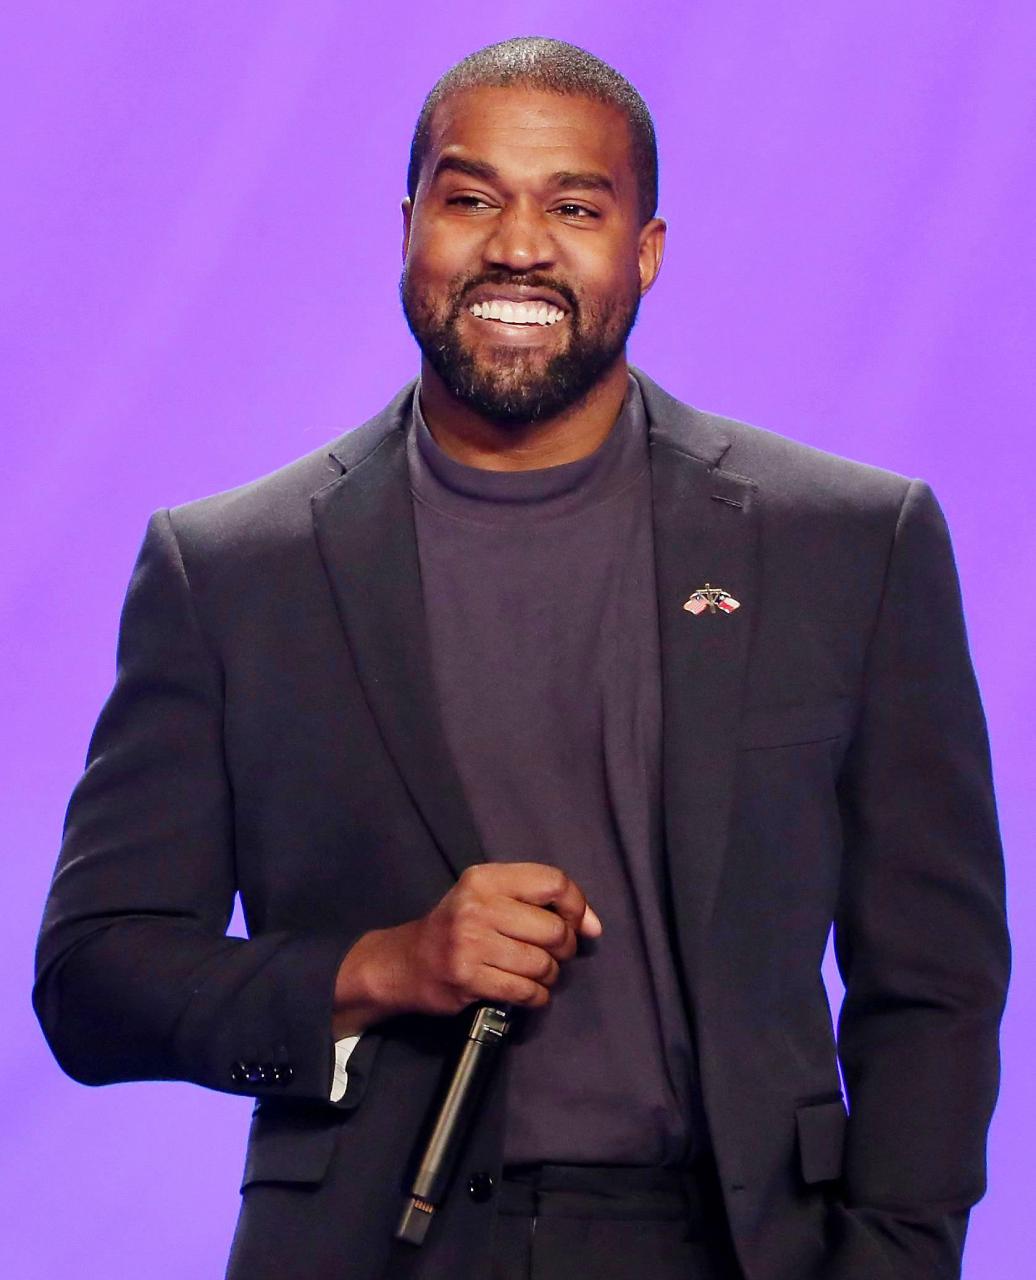 Kanye West becomes the wealthiest black man in American history with net worth of .6 Billion